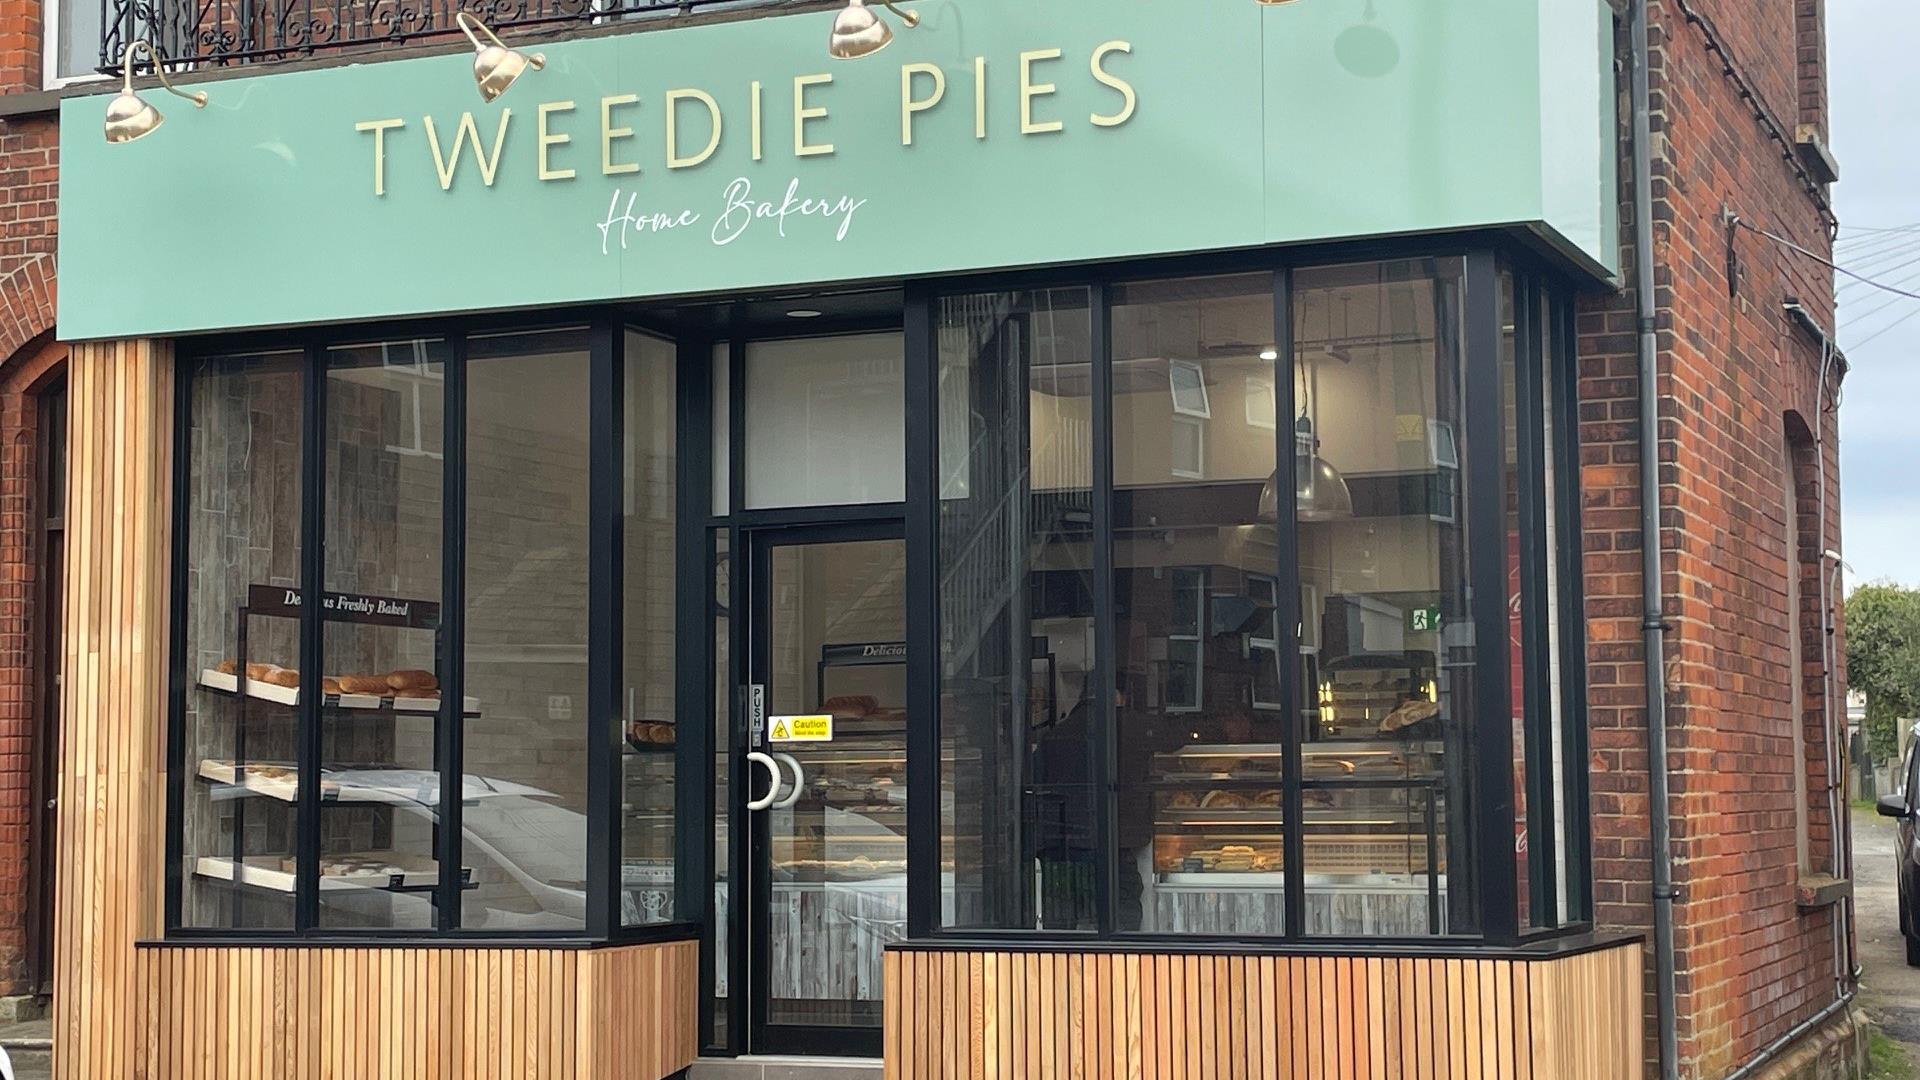 Exterior of Tweedie Pies Home Bakery with black framed glass, mint green sign and wooden panel trim